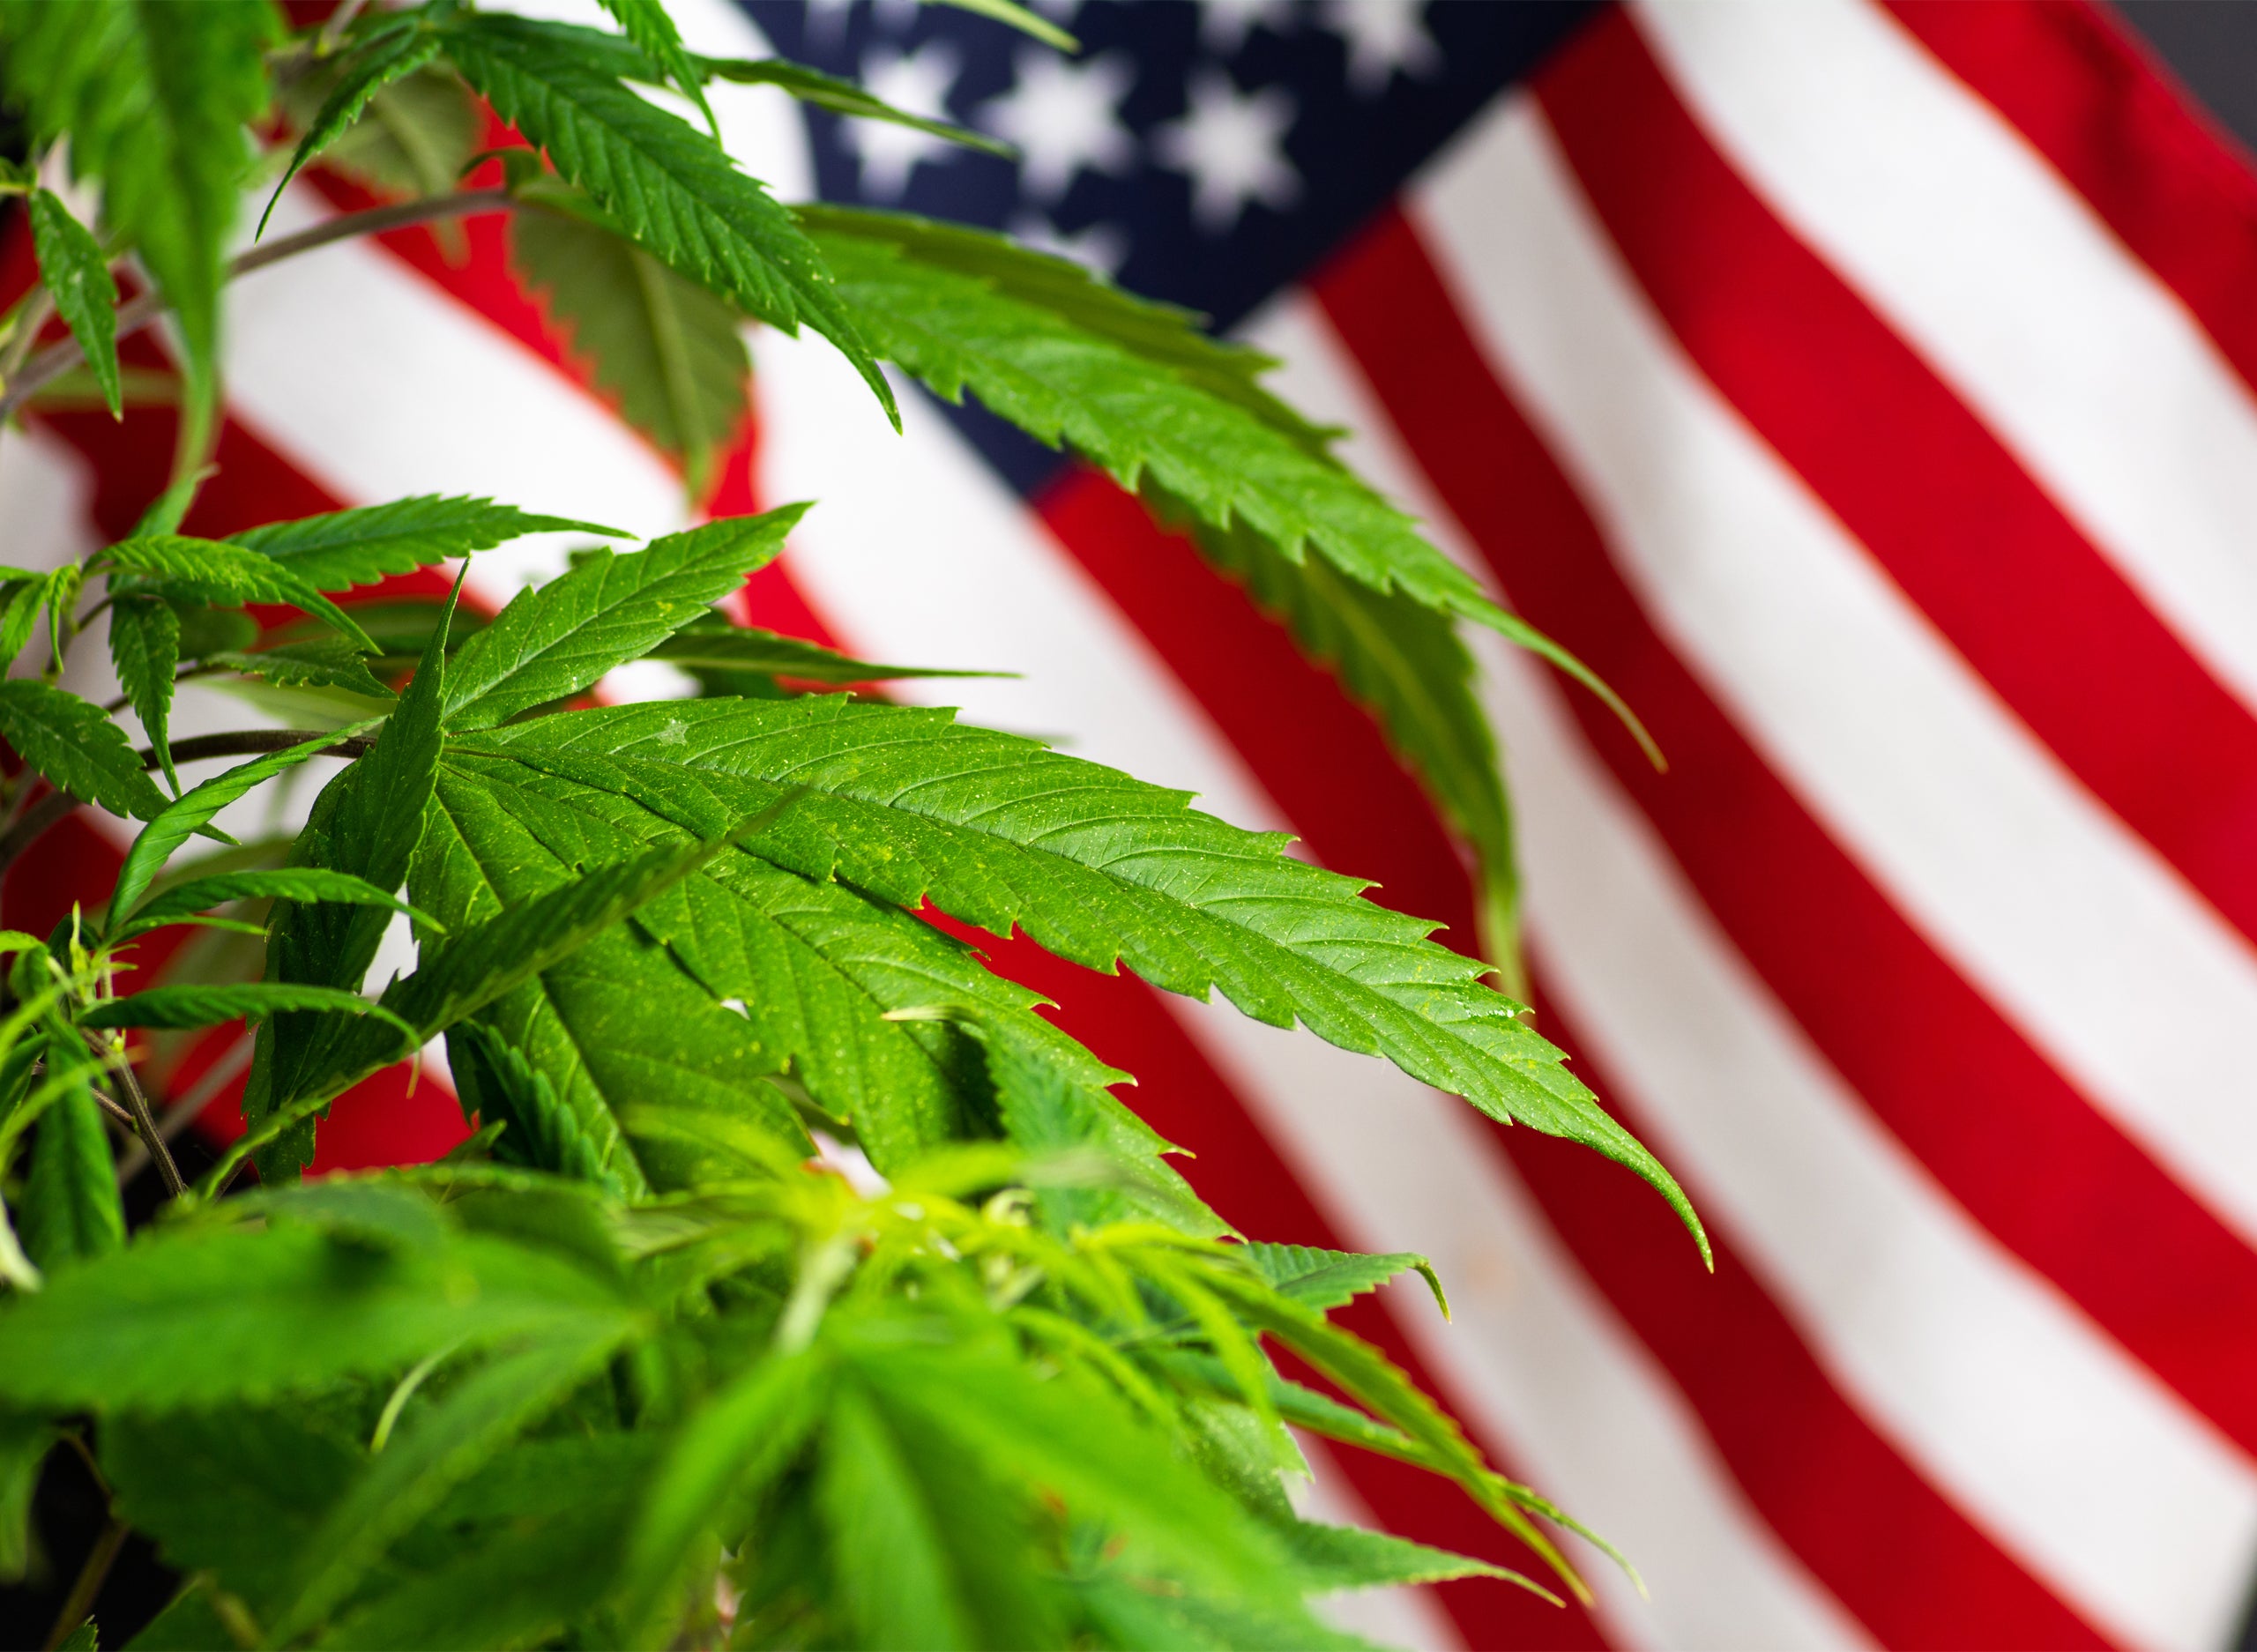 Polls Suggest Dicey Outcome For Adult-Use Cannabis In Midterms